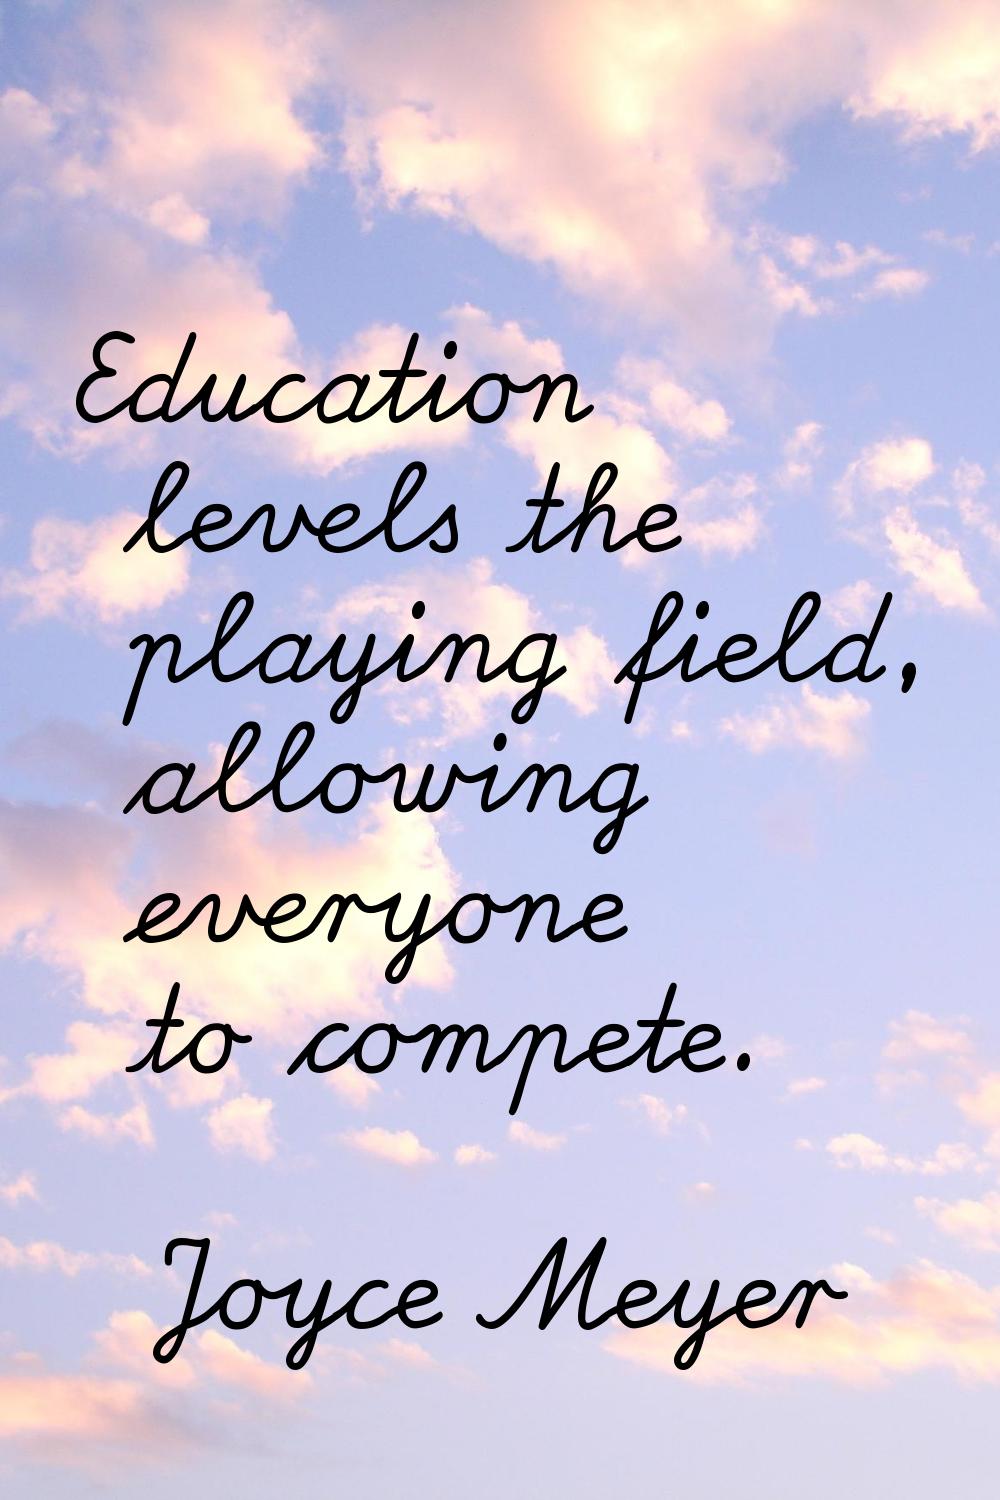 Education levels the playing field, allowing everyone to compete.